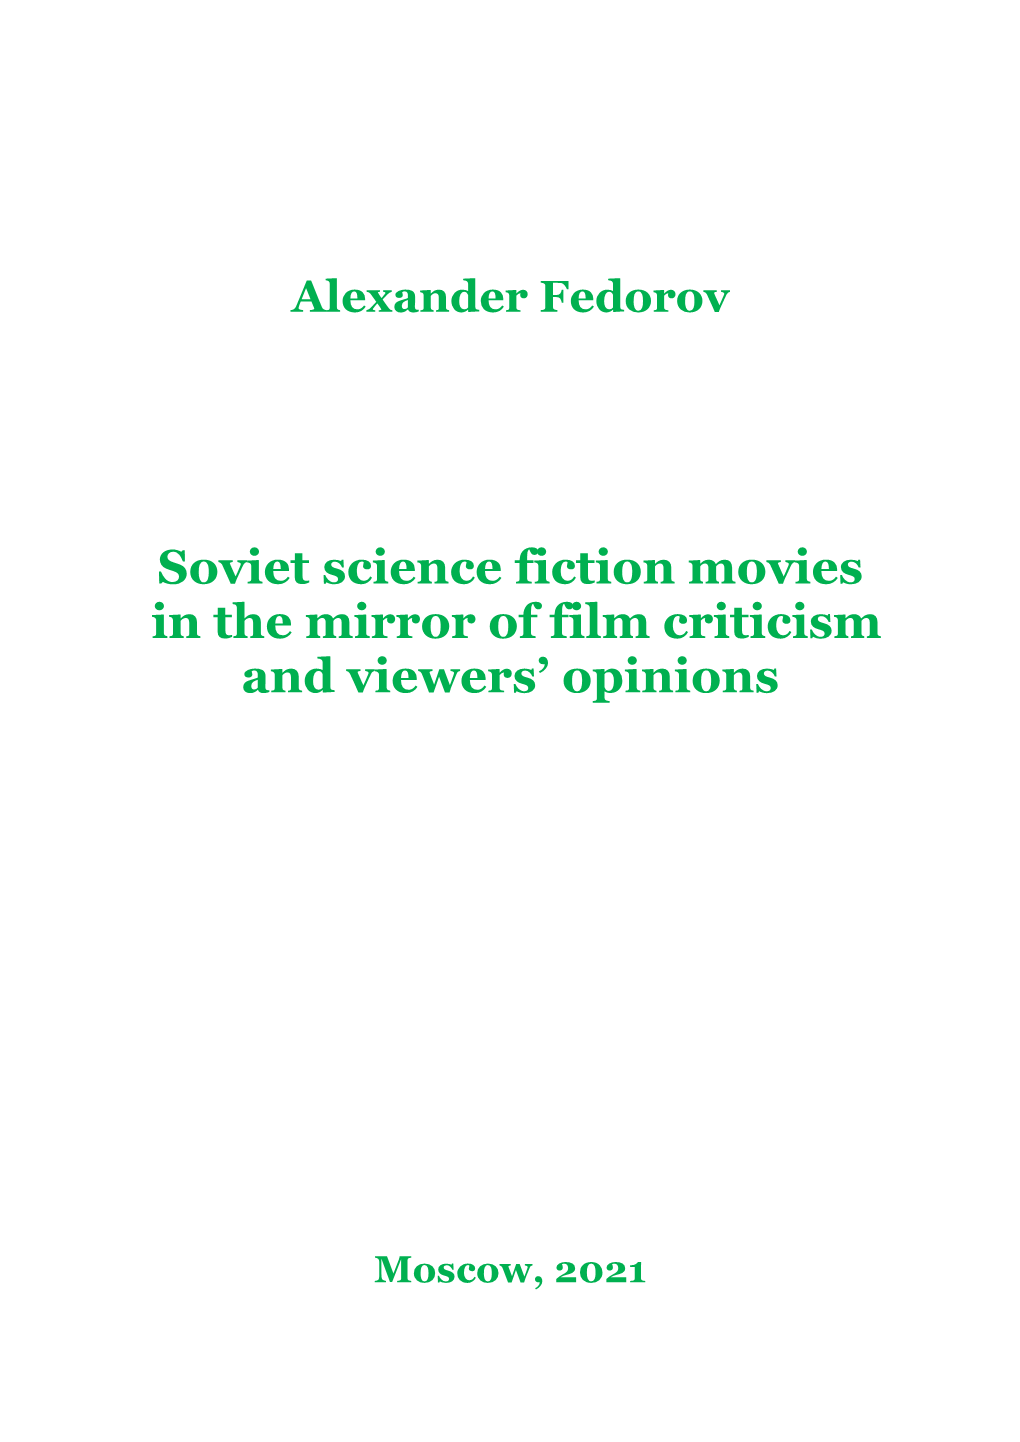 Soviet Science Fiction Movies in the Mirror of Film Criticism and Viewers' Opinions